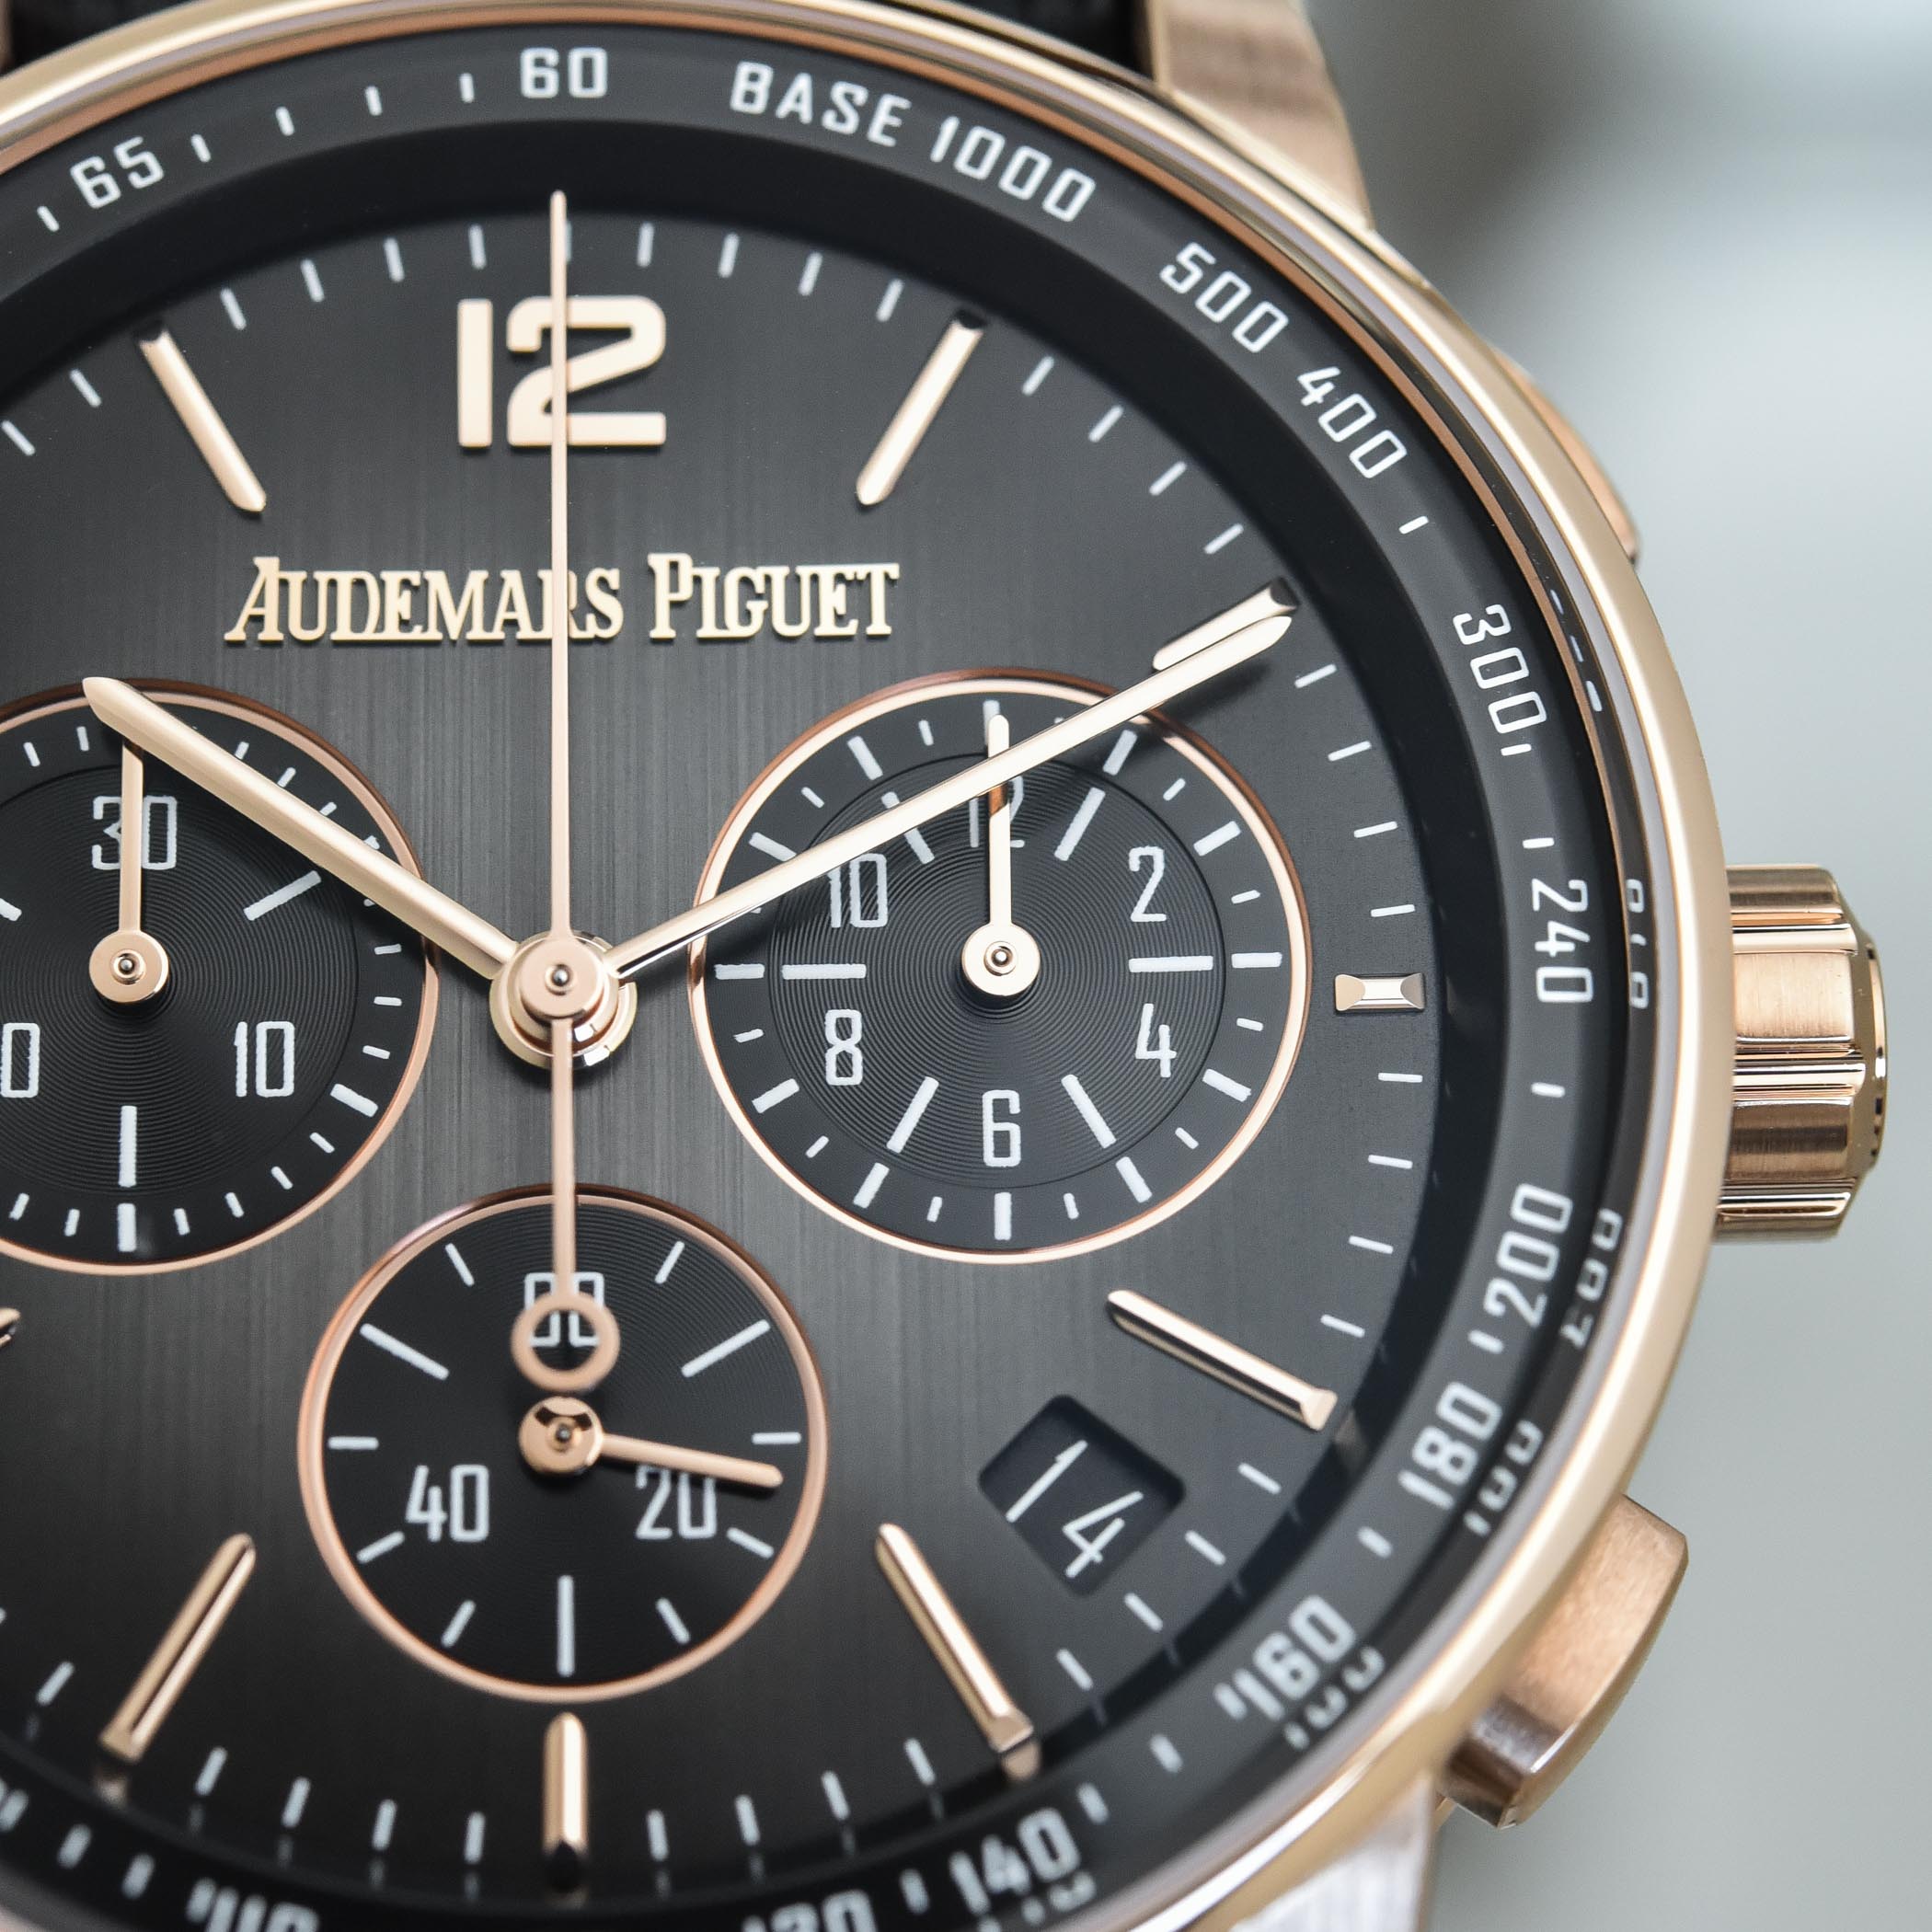 Code 11.59 by Audemars Piguet Selfwinding Chronograph Gold and Ceramic - 26393NR.OO.A002CA.01